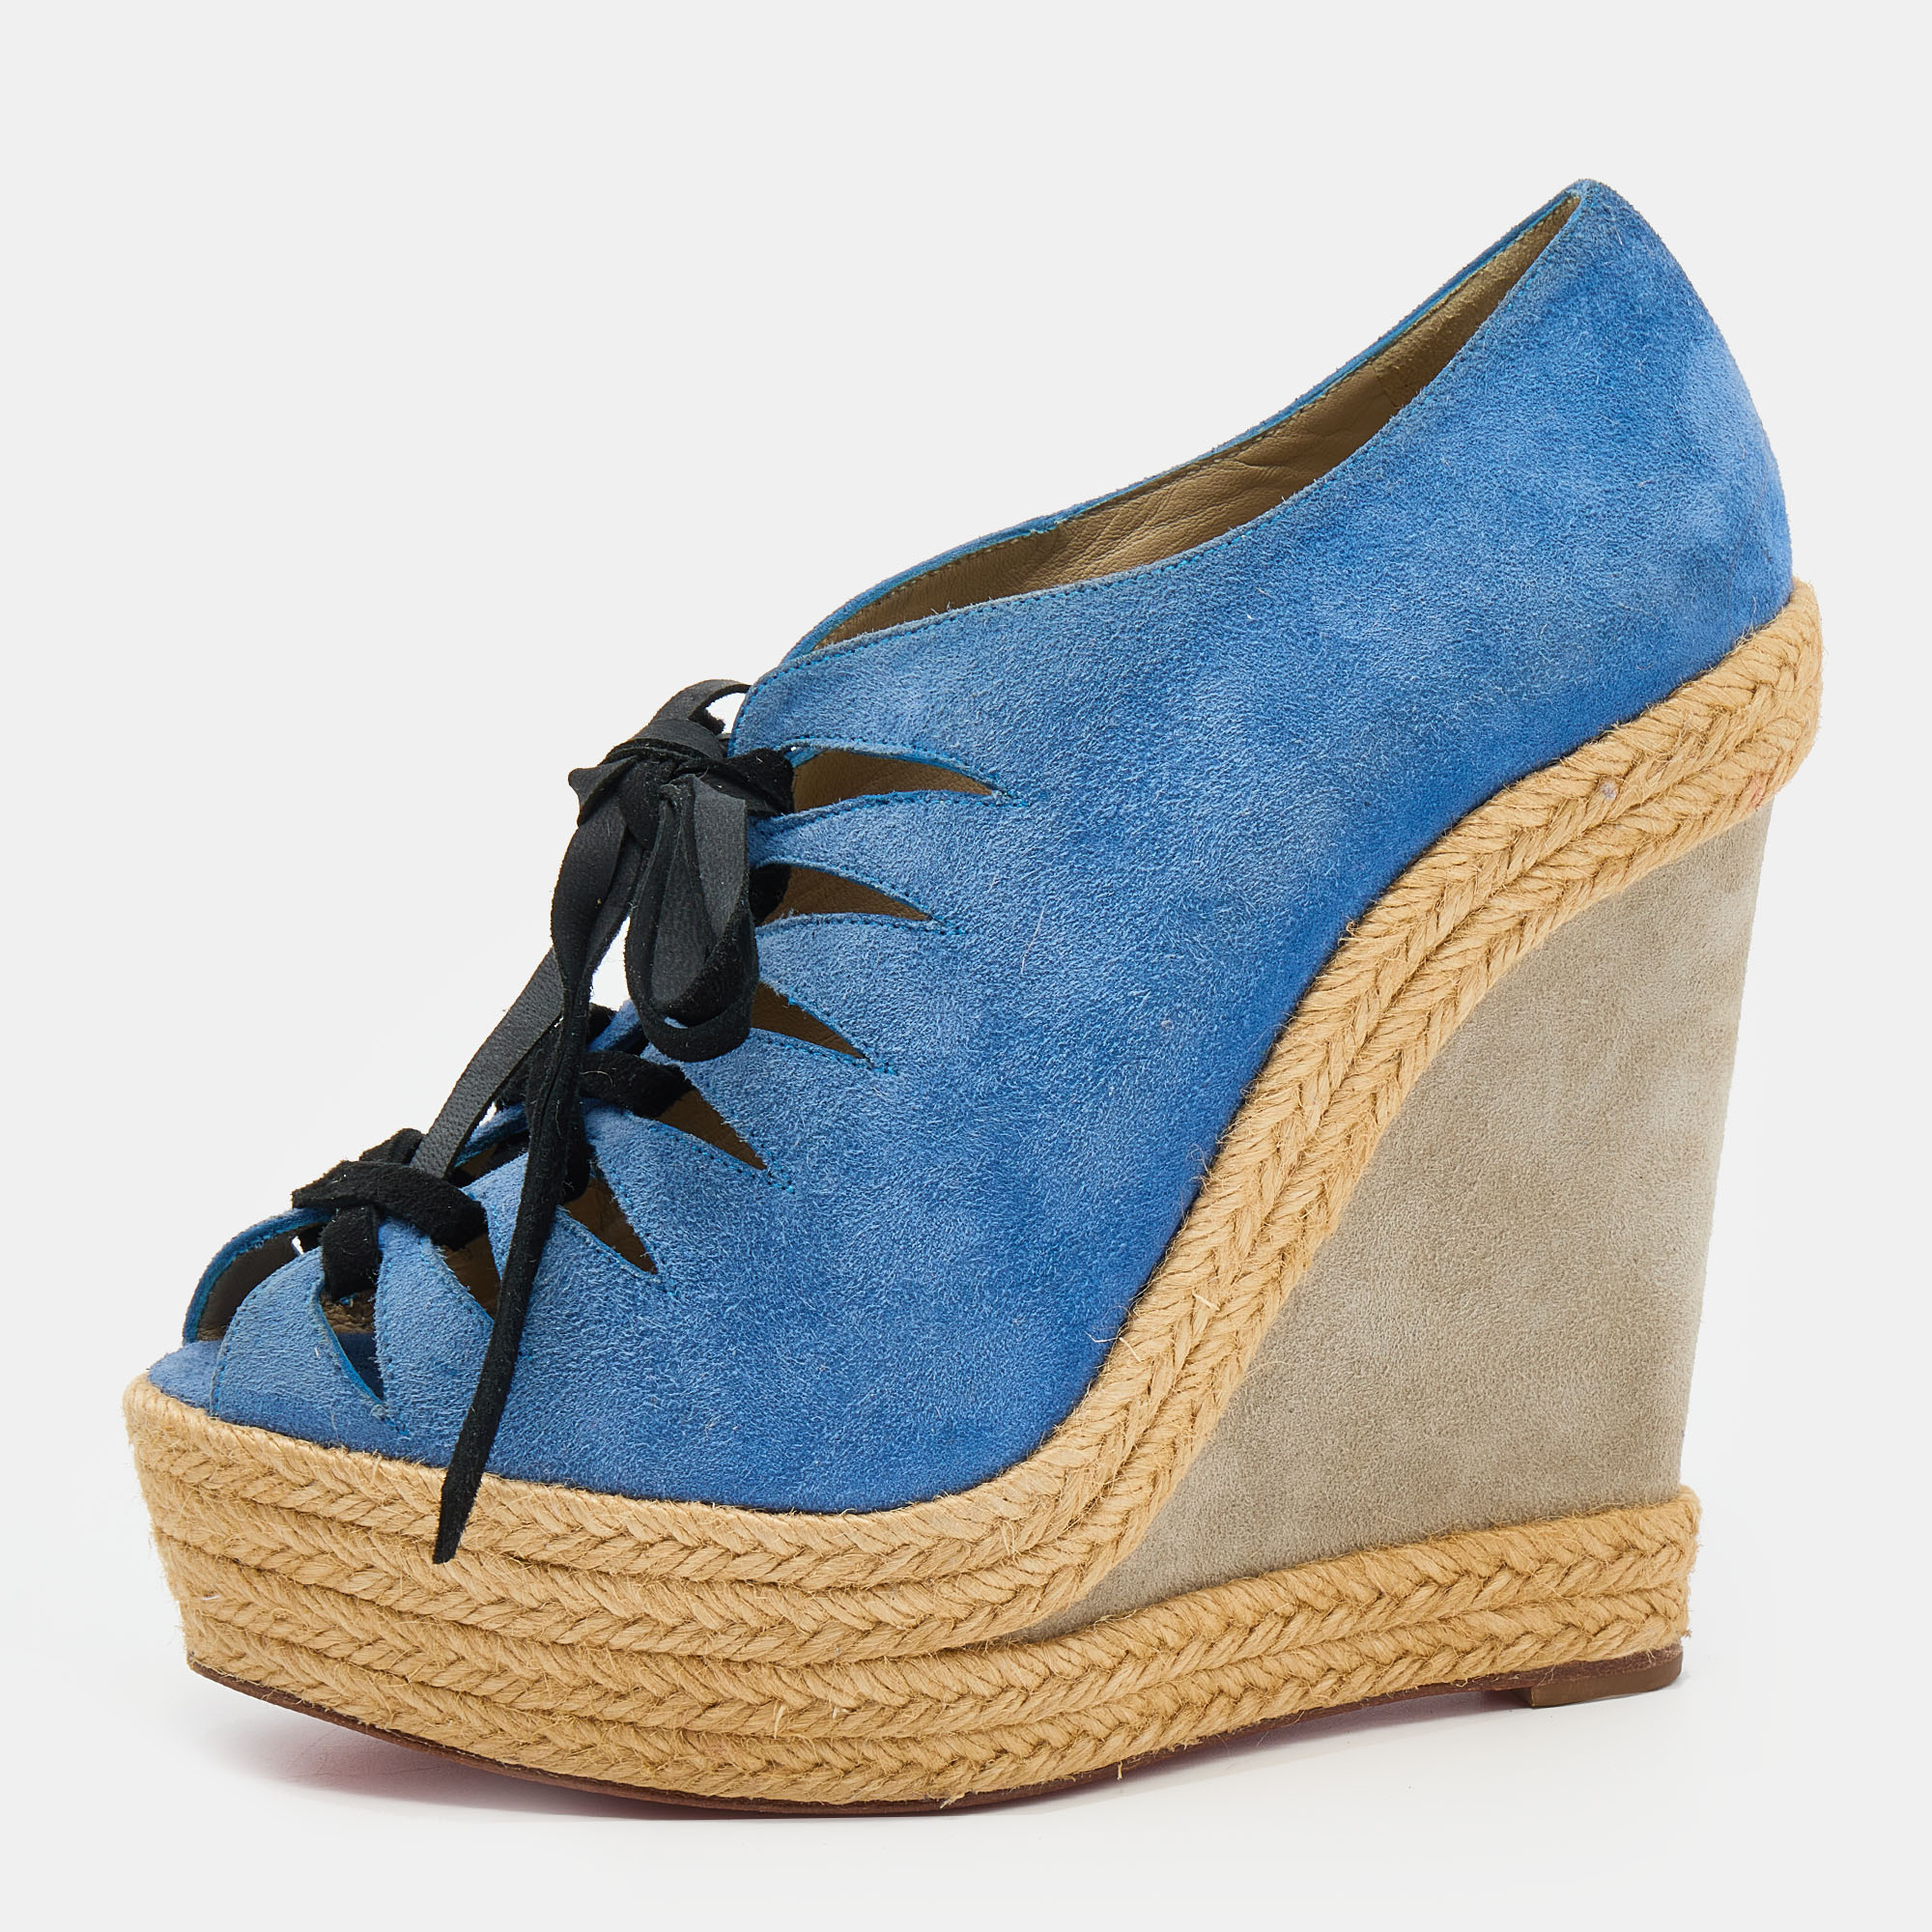 Pre-owned Christian Louboutin Blue/grey Suede Lace Up Espadrille Platform Wedge Sandals Size 37